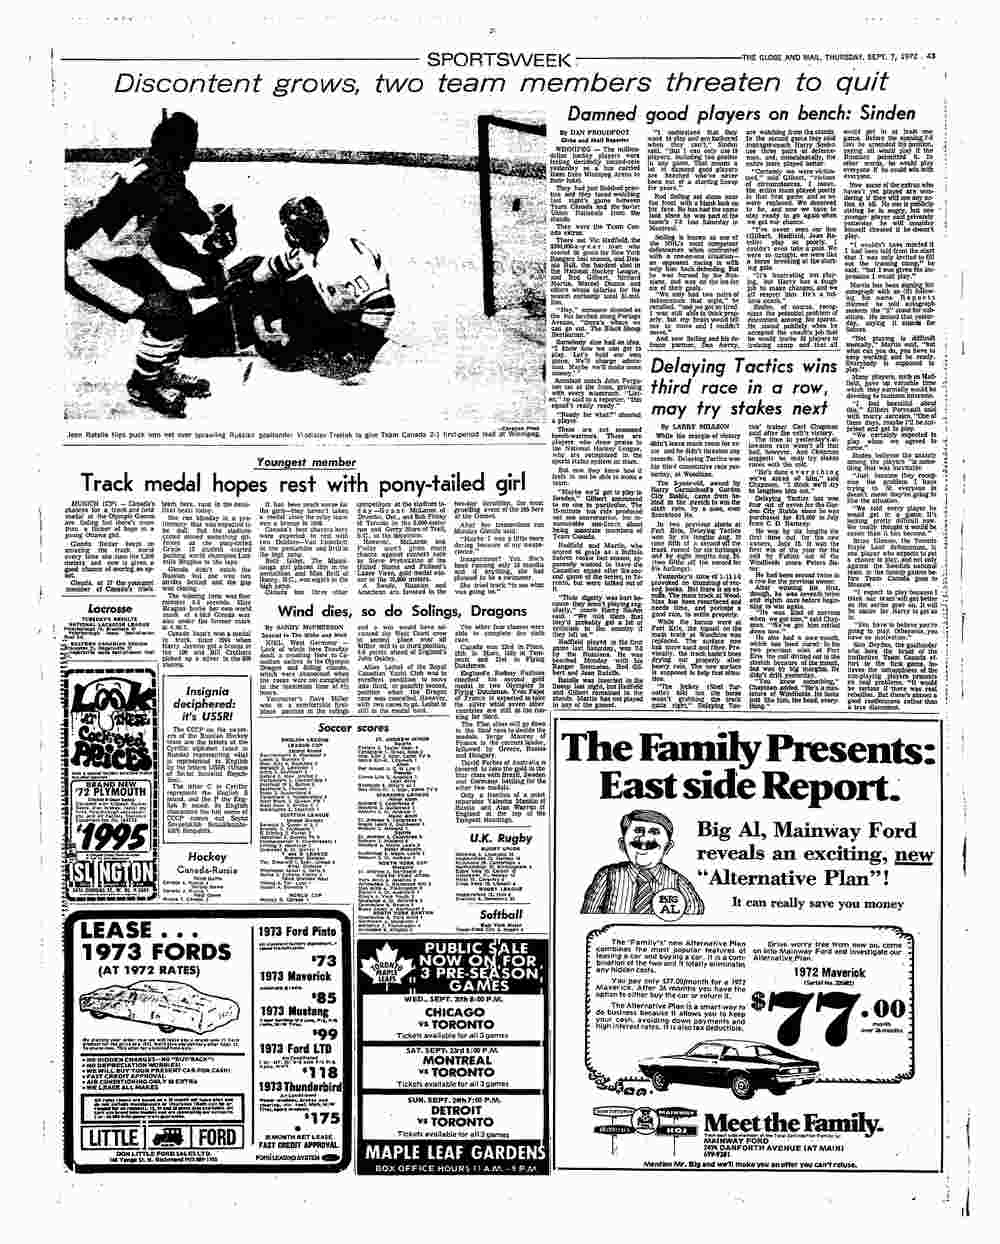 Black and white photo of a news article portraying a hockey game with words and photos